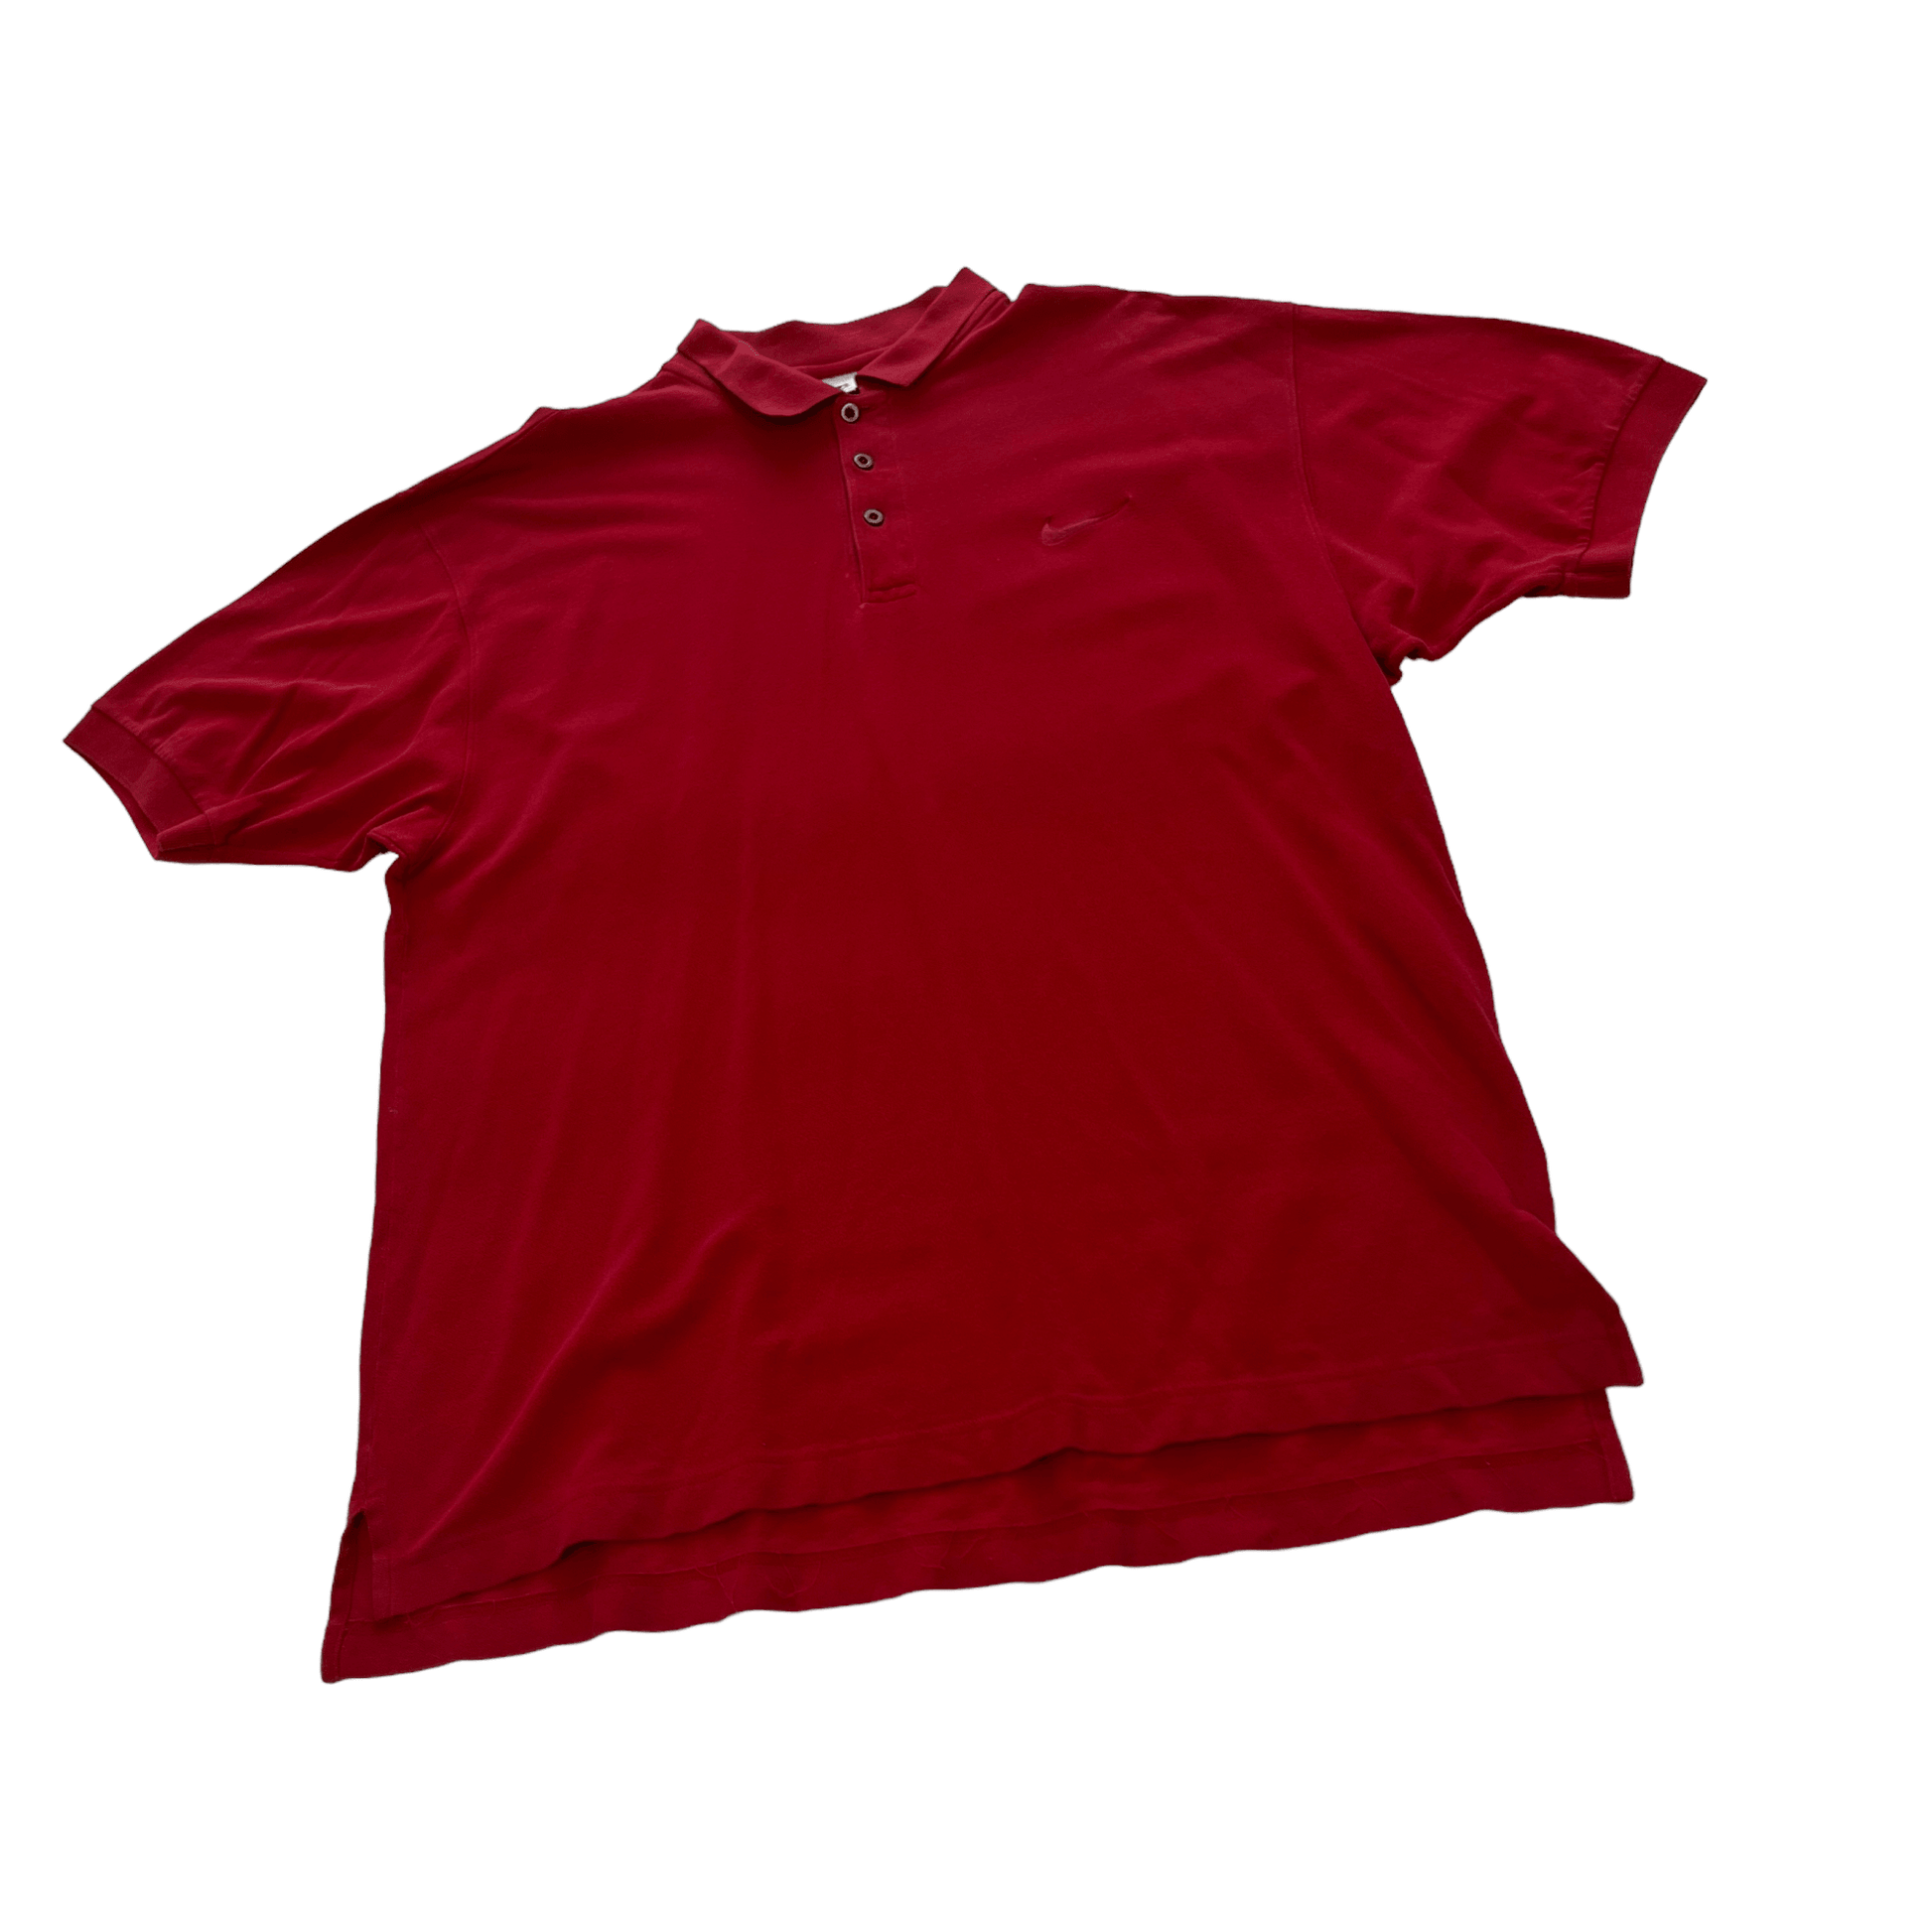 Vintage 90s Red Nike Polo Shirt - Large (Recommended Size - Extra Large) - The Streetwear Studio